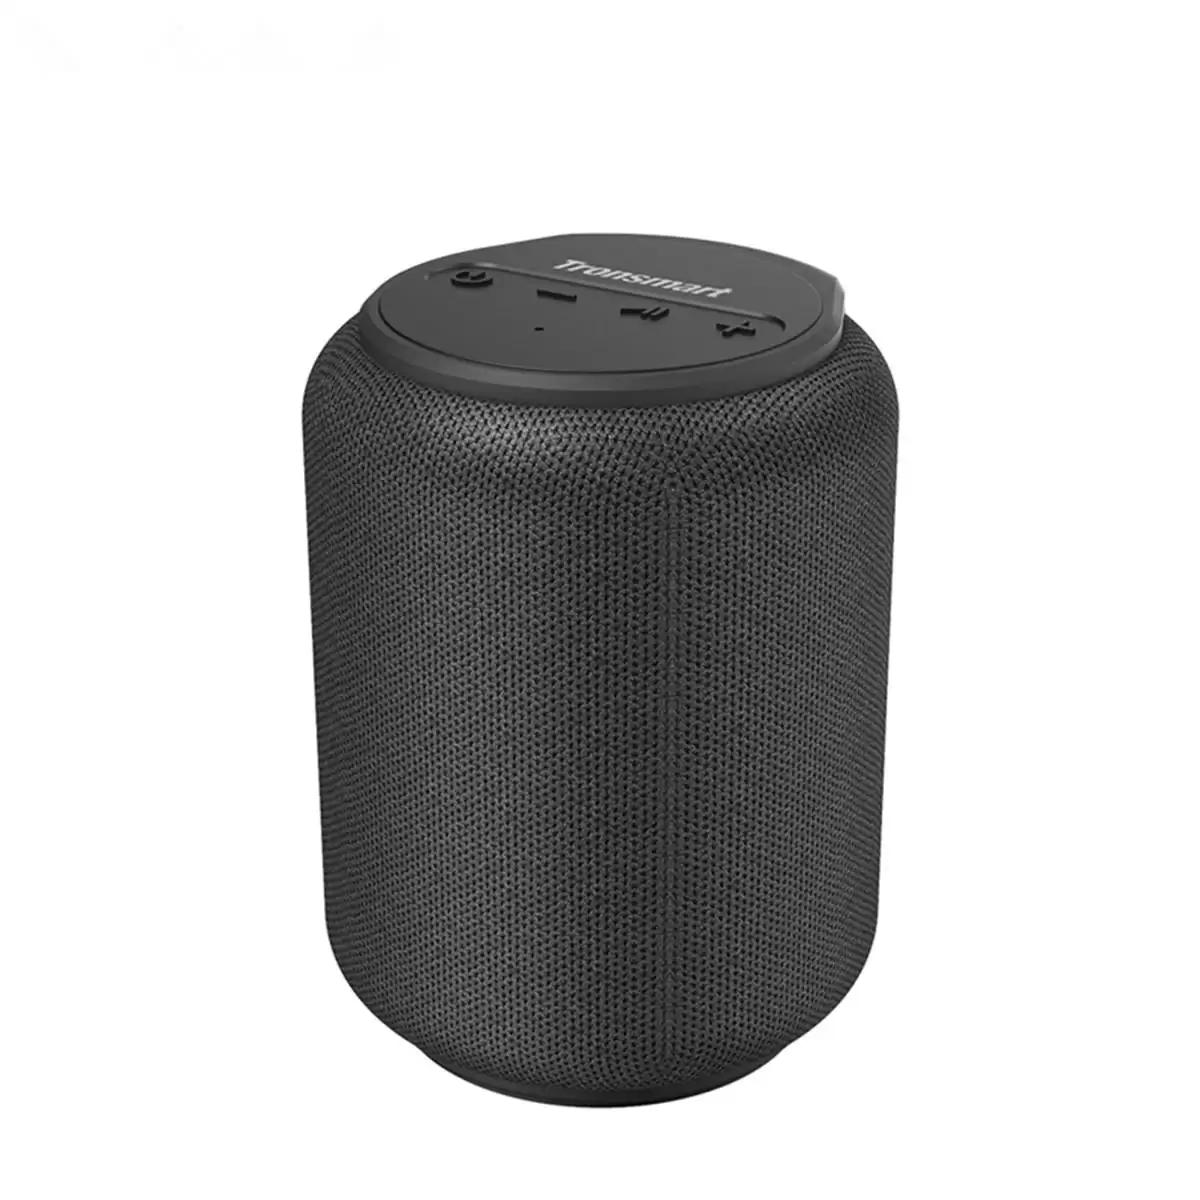 Order In Just $26.39 12% Off For Tronsmart Element T6 2500 Mah 15w Ipx6 Waterproof Portable Mini Bluetooth Speaker With This Coupon At Banggood